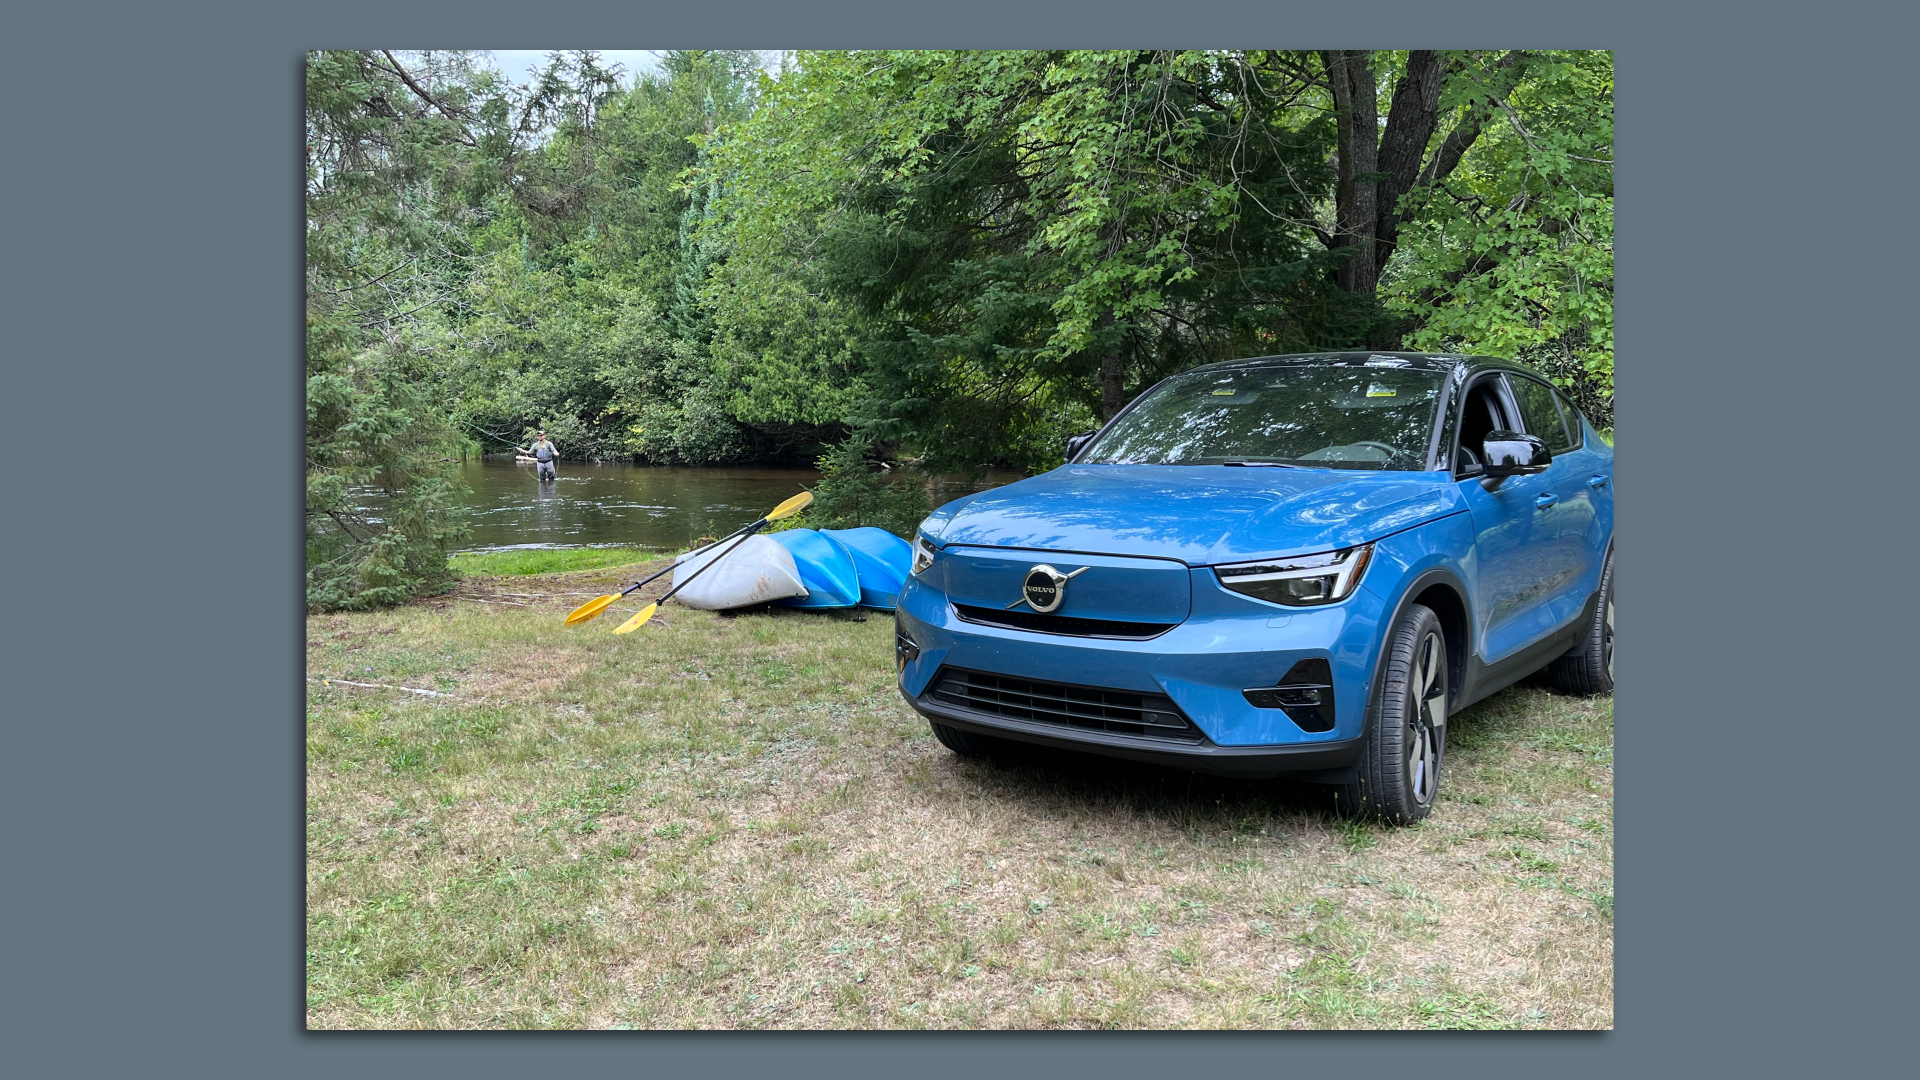 Volvo C40 Recharge parked alongside the Au Sable river in Michigan, known as the "Holy Waters" for fly-fishing